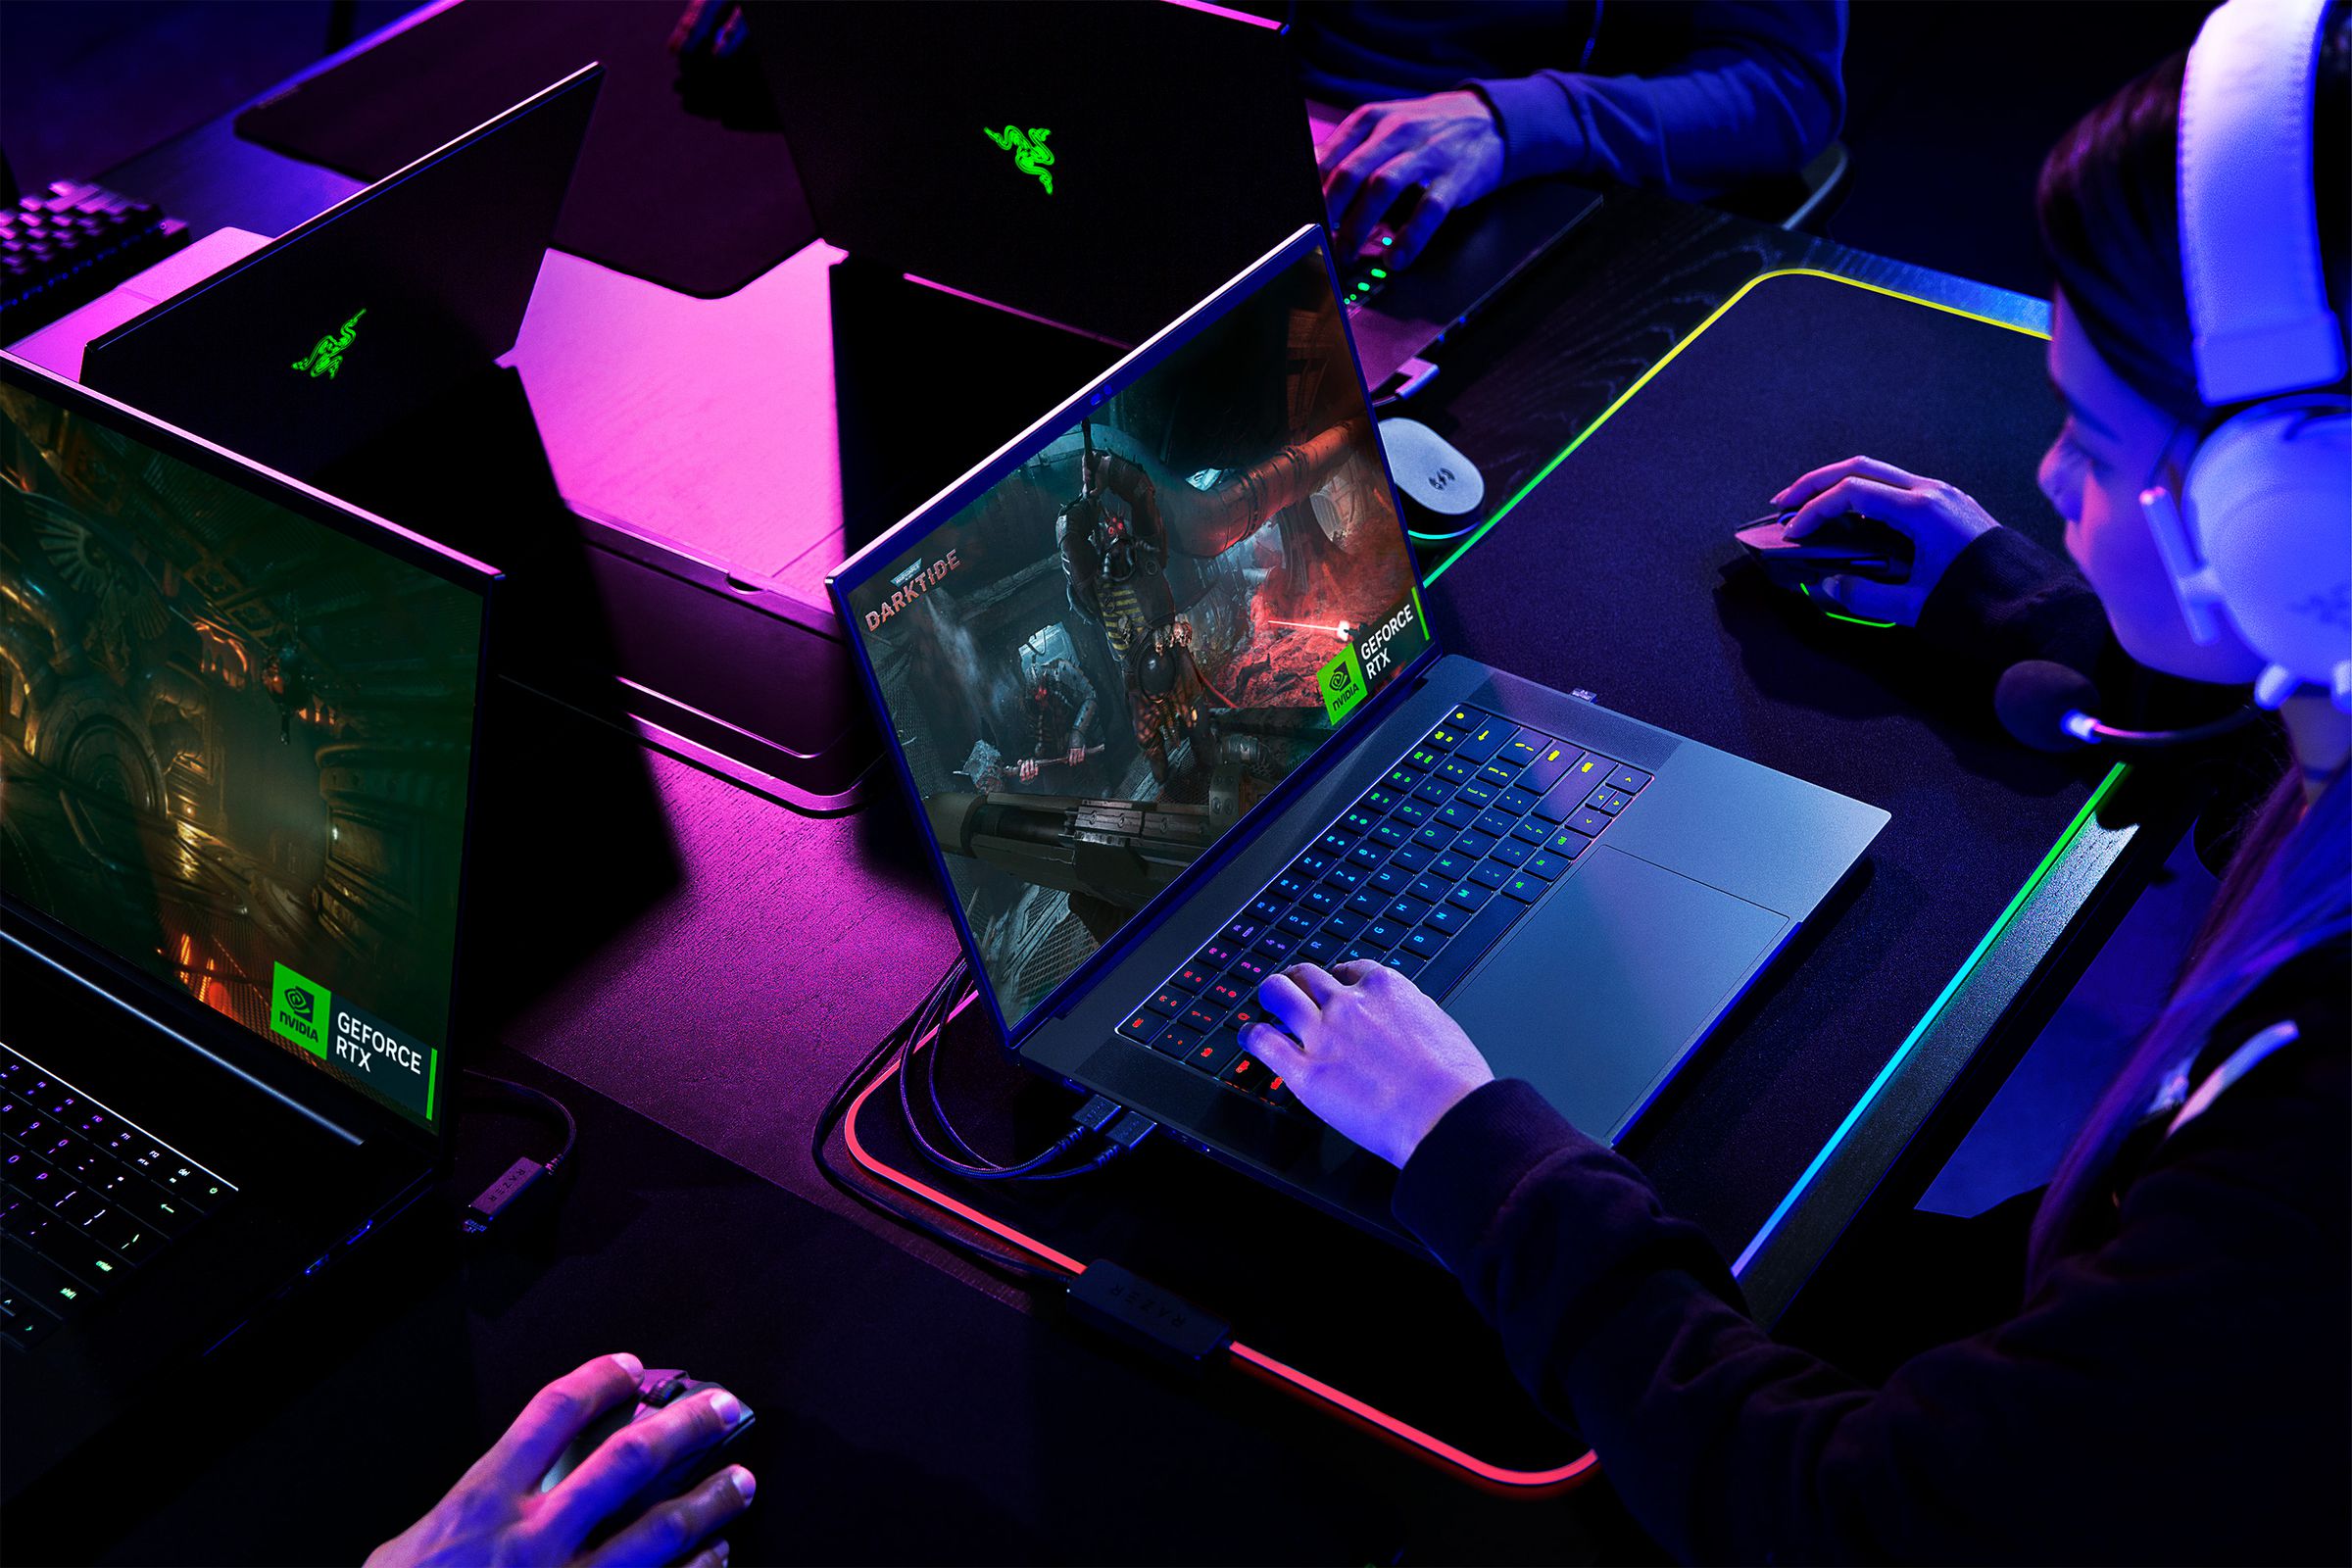 Stylized image with pink and blue lighting of several gamers at a table. All are using Razer Blade laptops with large desk mats plugged into them. The desk mats have RGB edge lighting and are wirelessly powering the gaming mice.